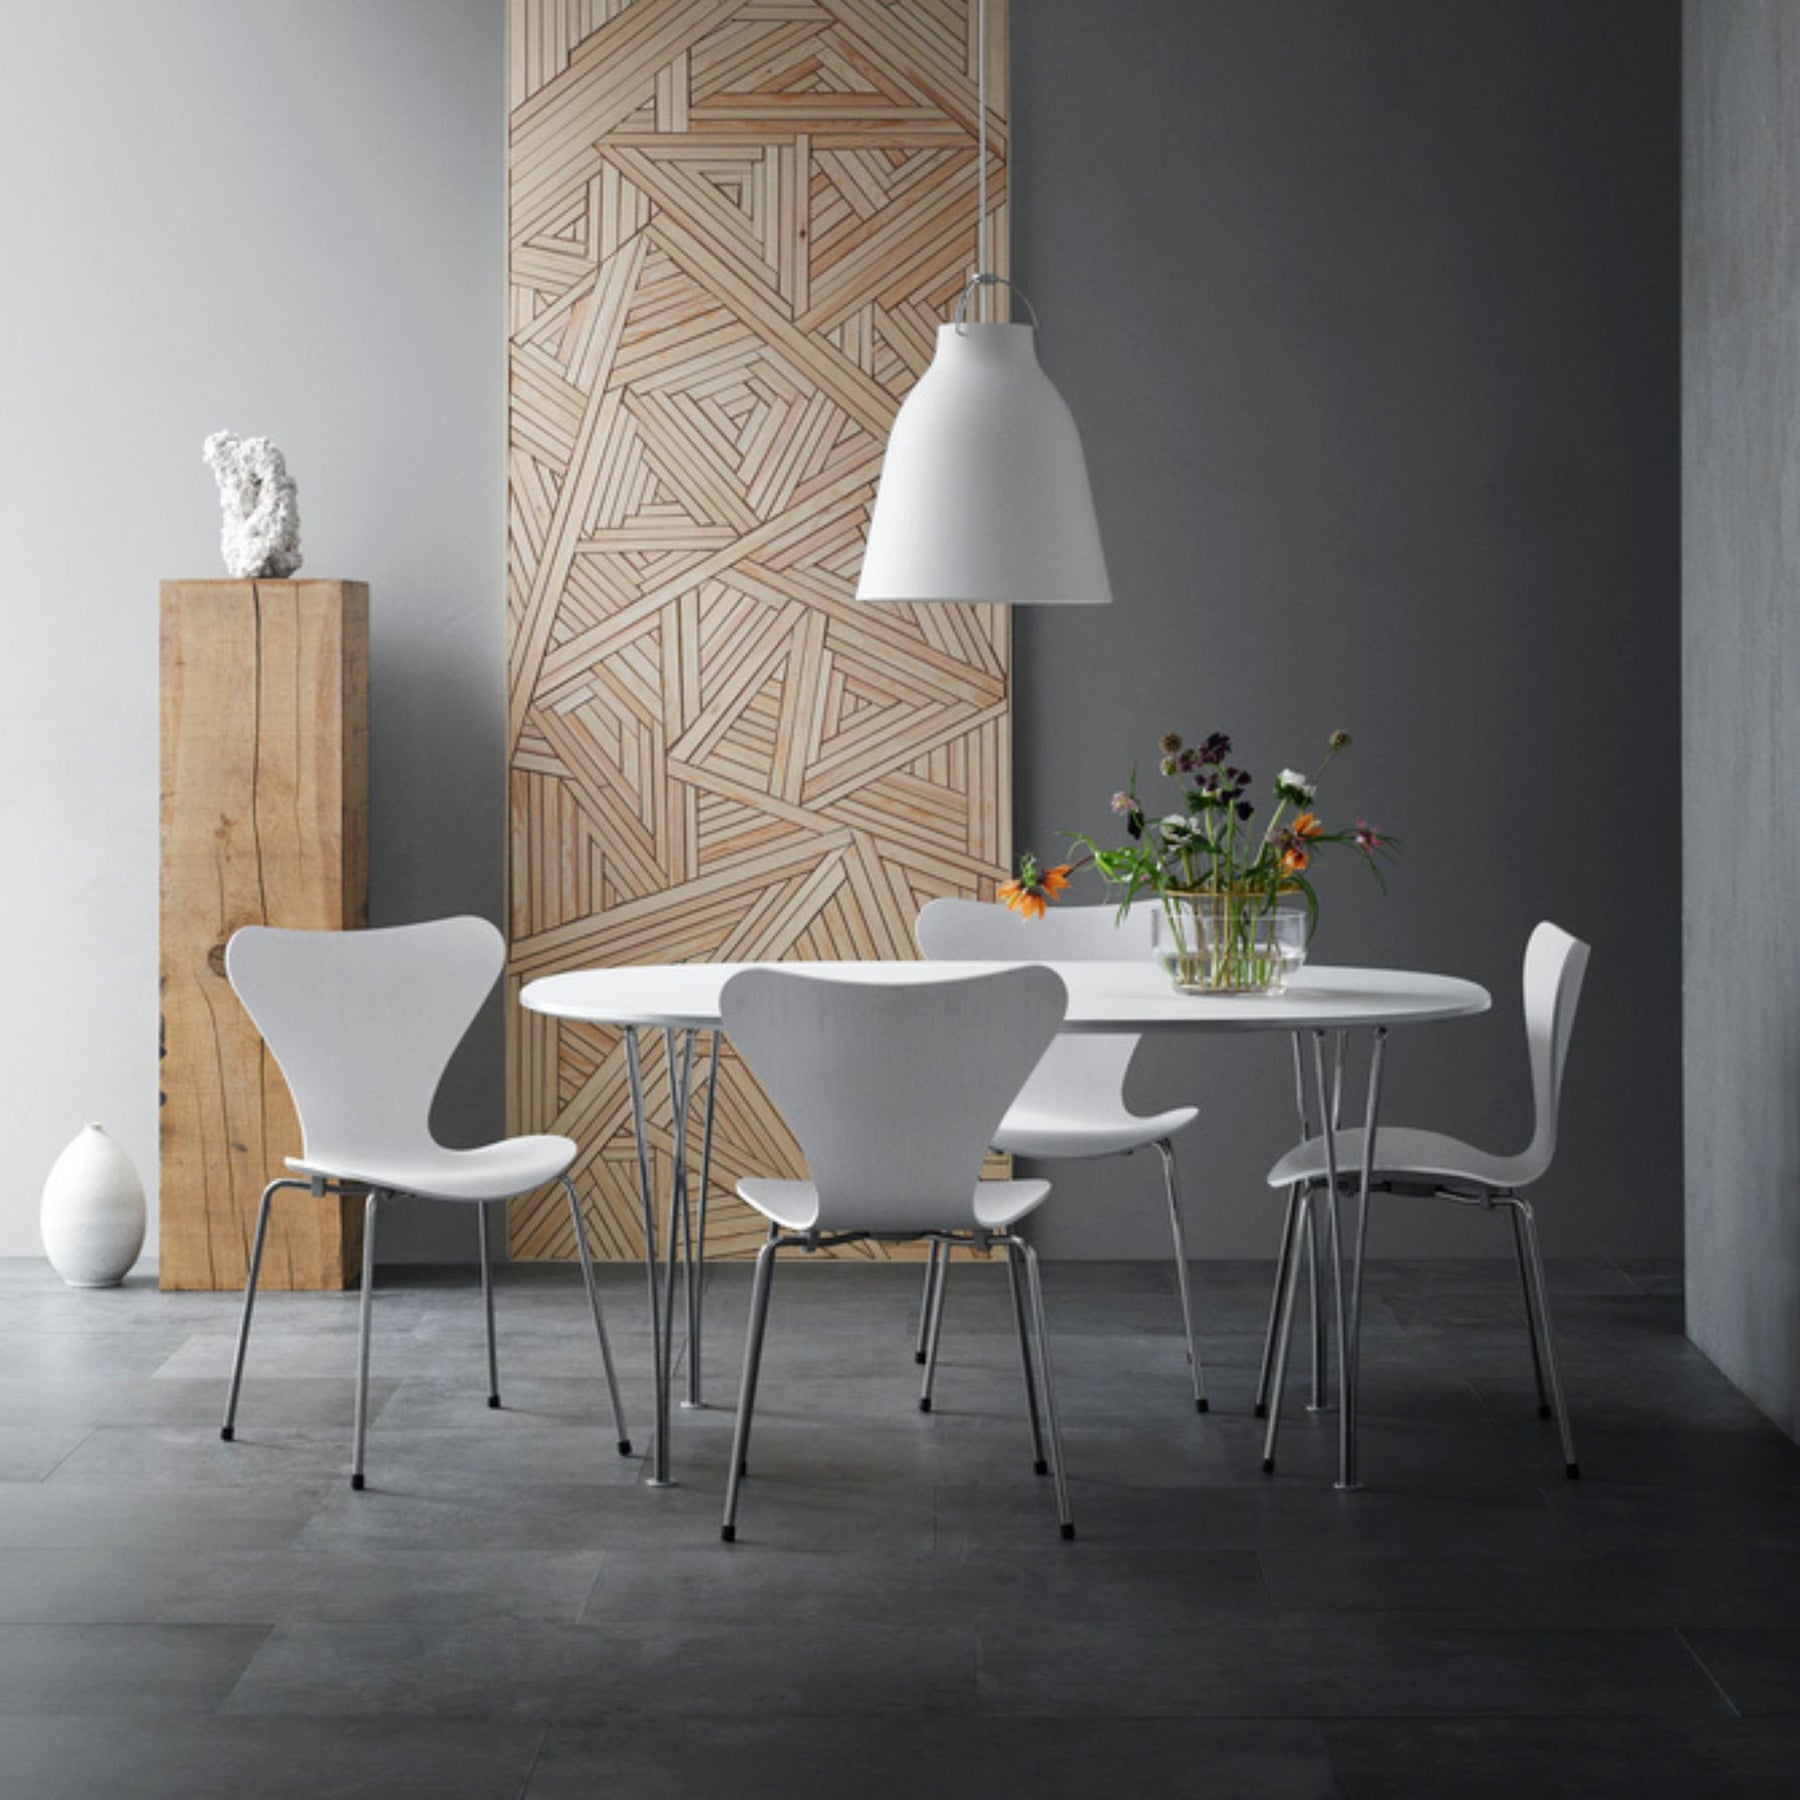 Fritz Hansen Series 7 Chair White Colored Ash in Room with Super Elliptical Dining Table and Caravaggio Pendant Light